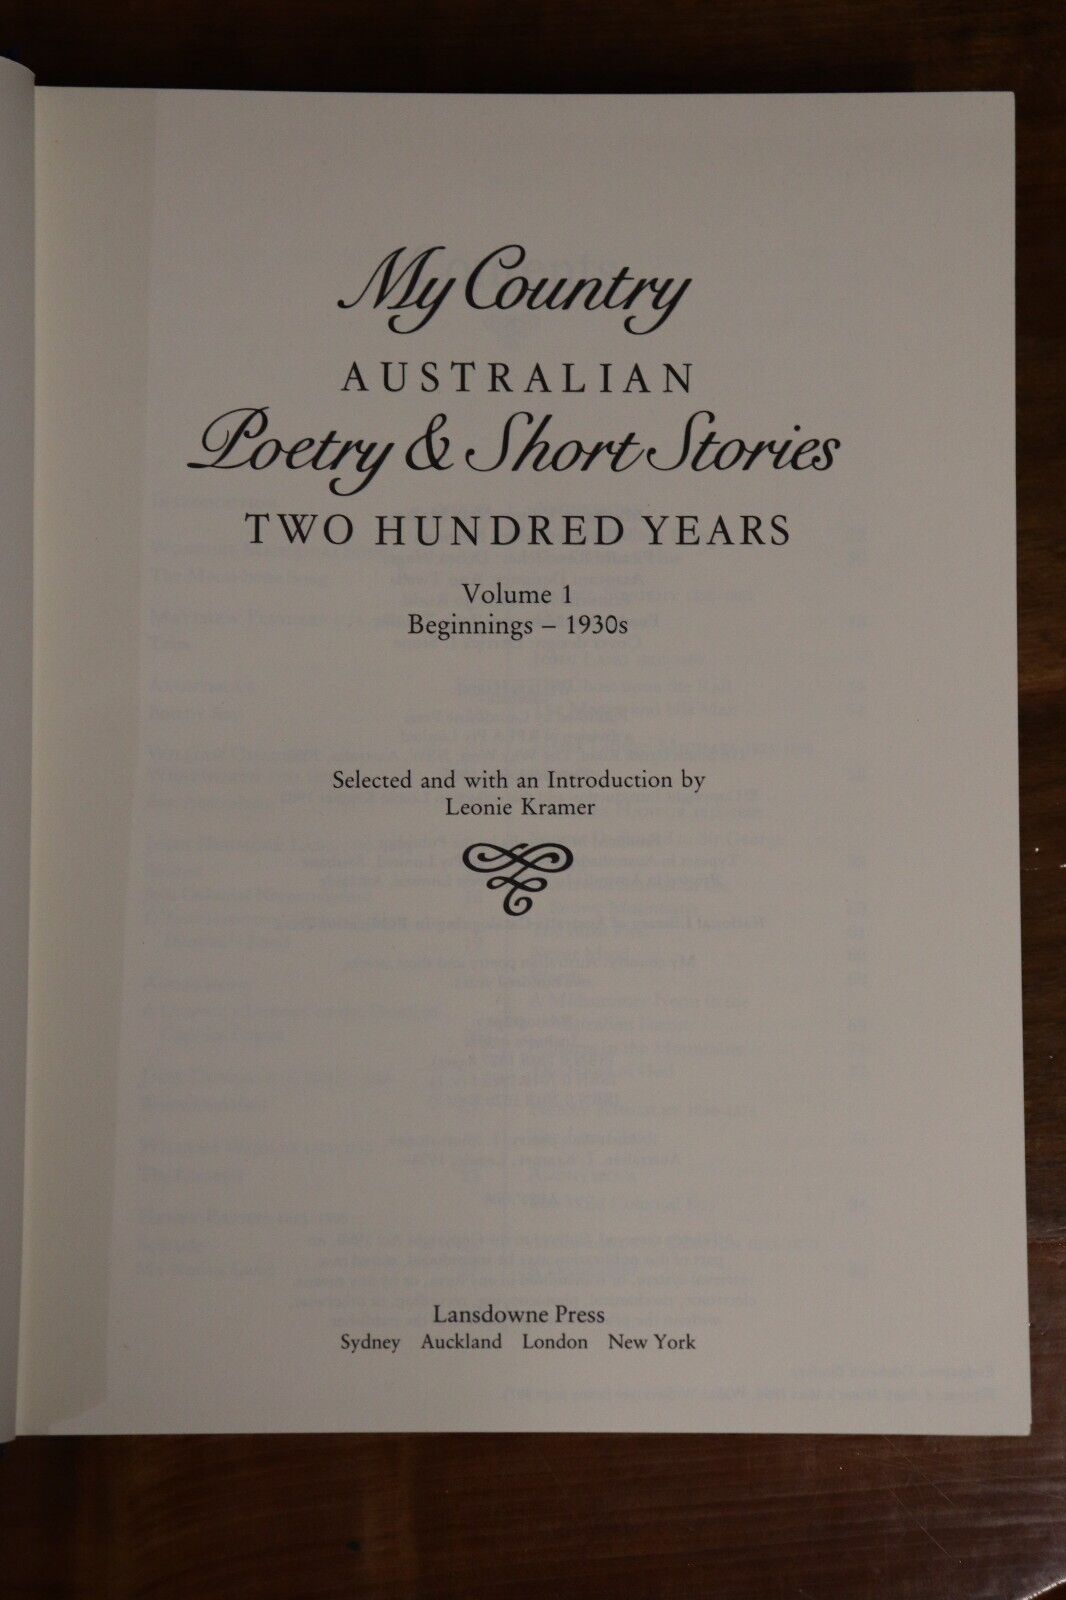 My Country: Australian Poetry & Short Stories - 1985 - 2 Vol Literature Book Set - 0